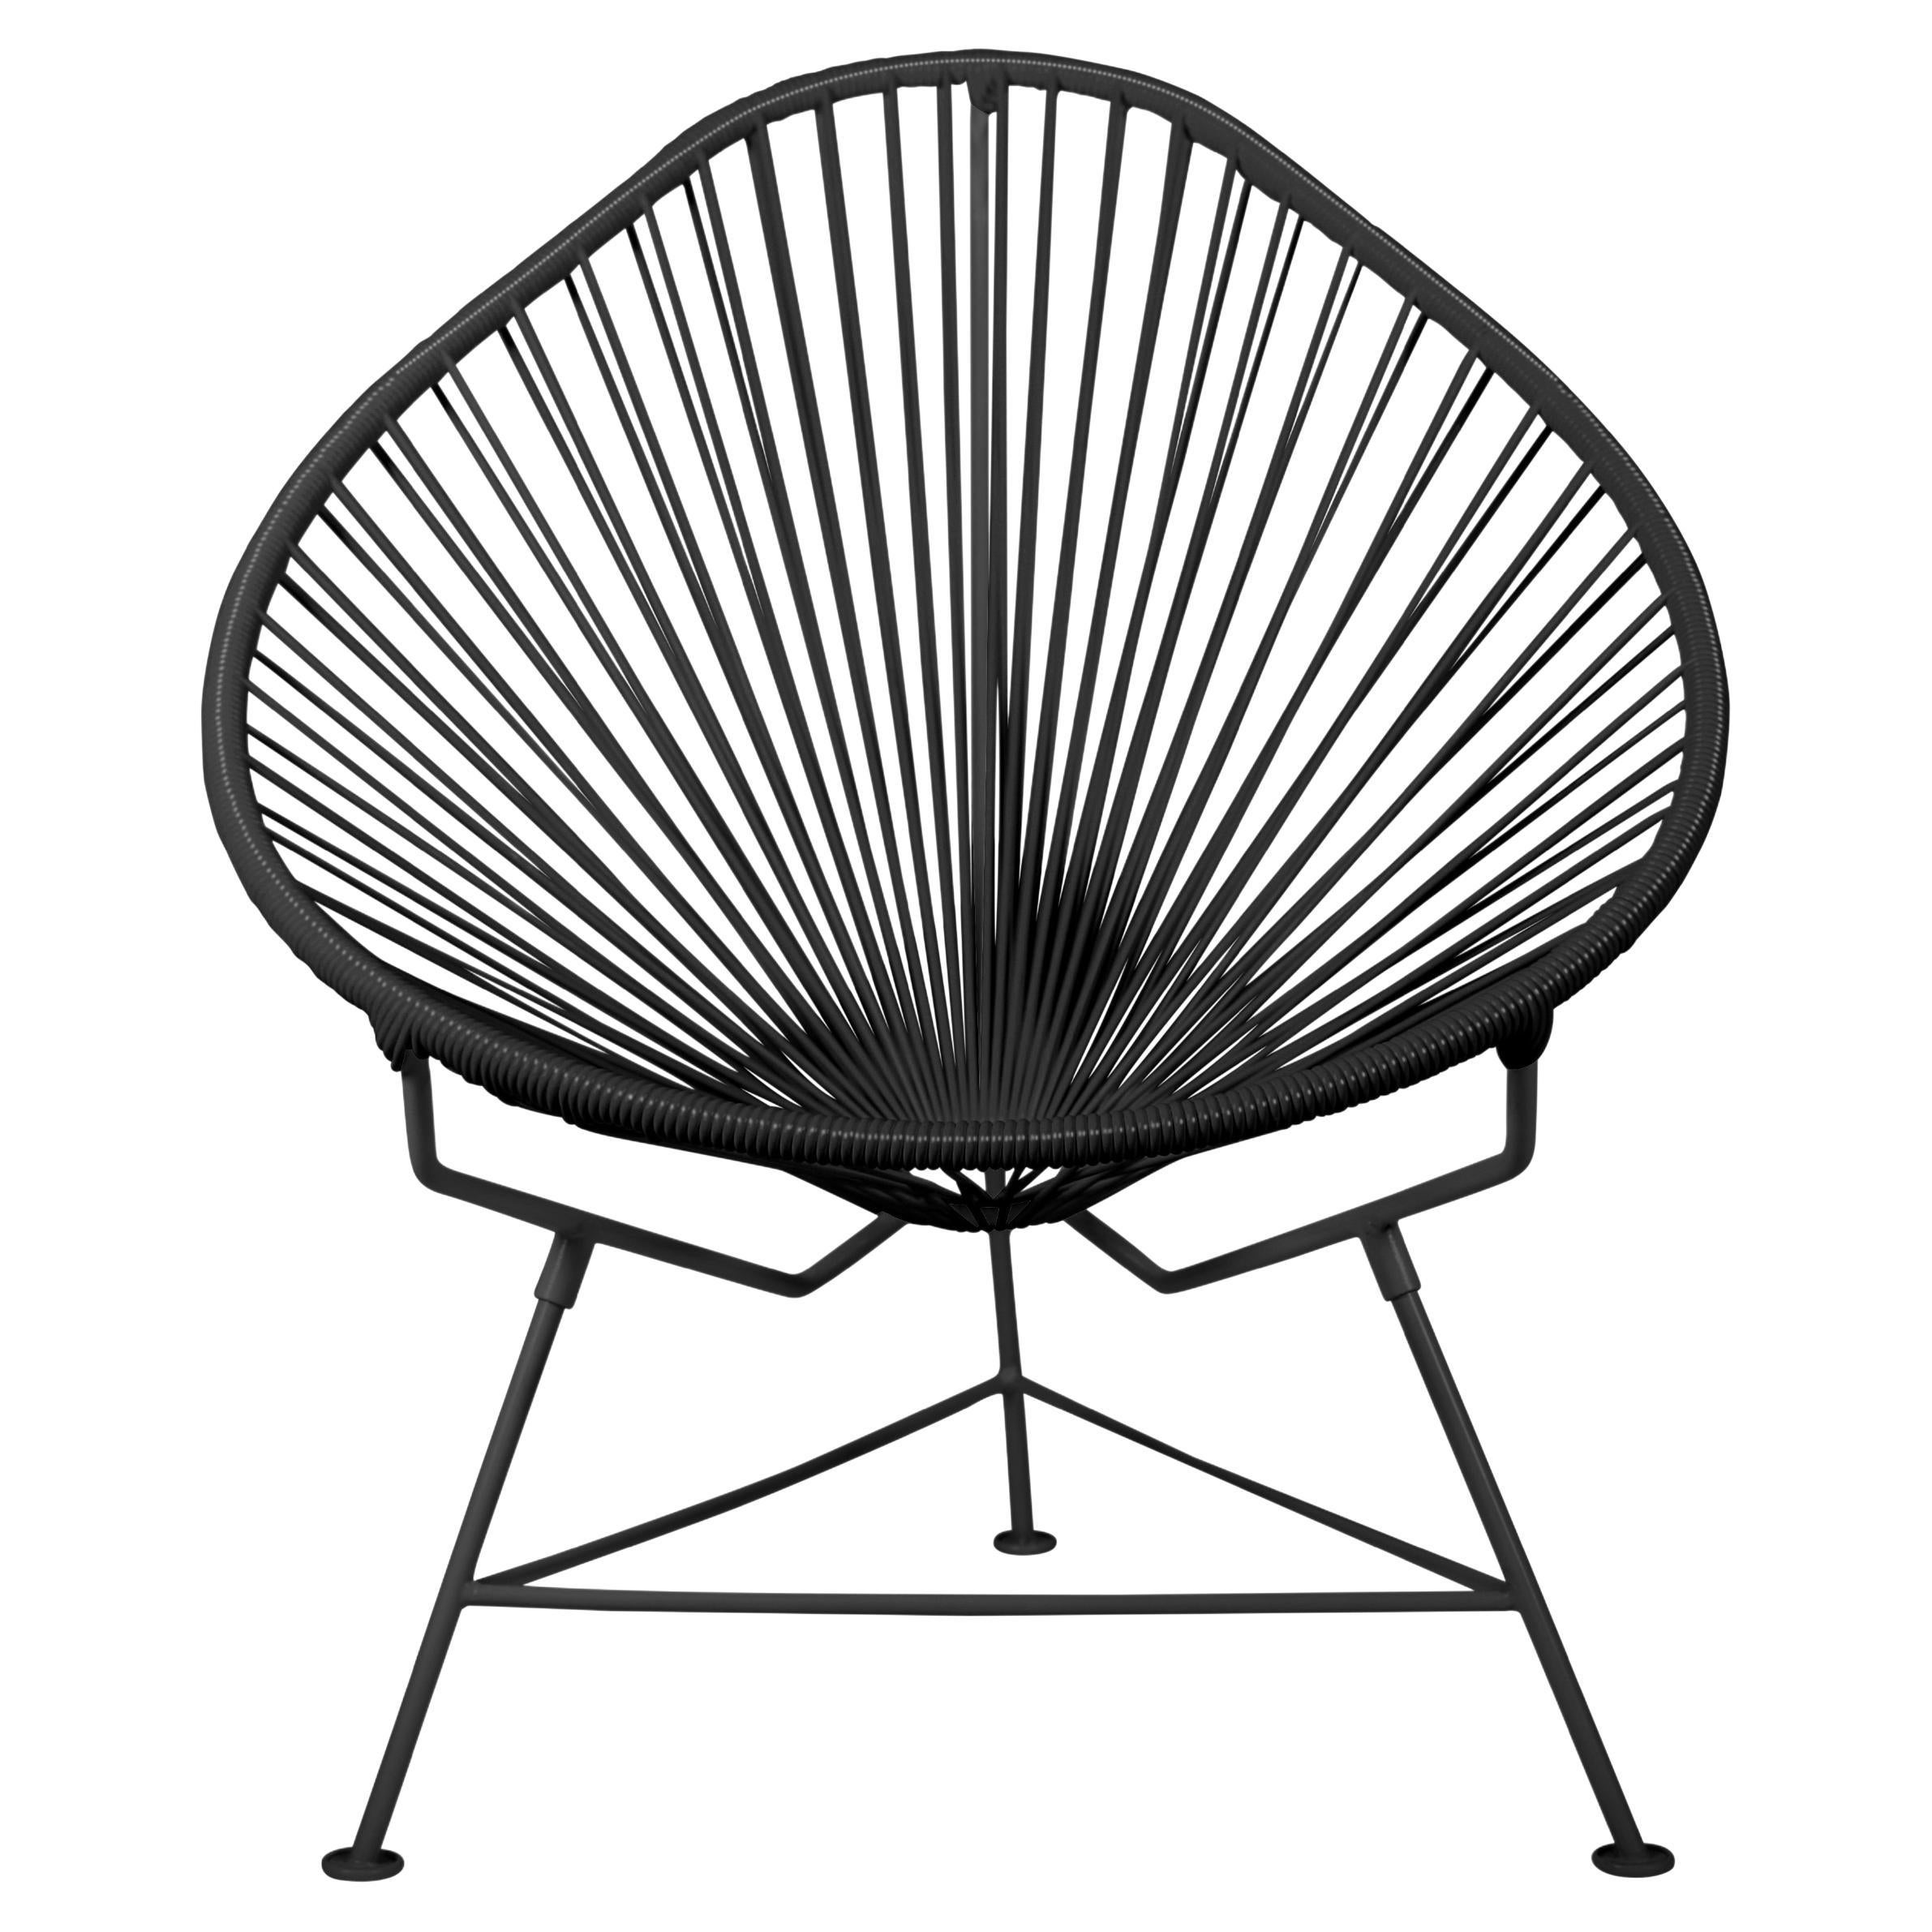 Innit Designs Acapulco Chair Black Weave on Black Frame